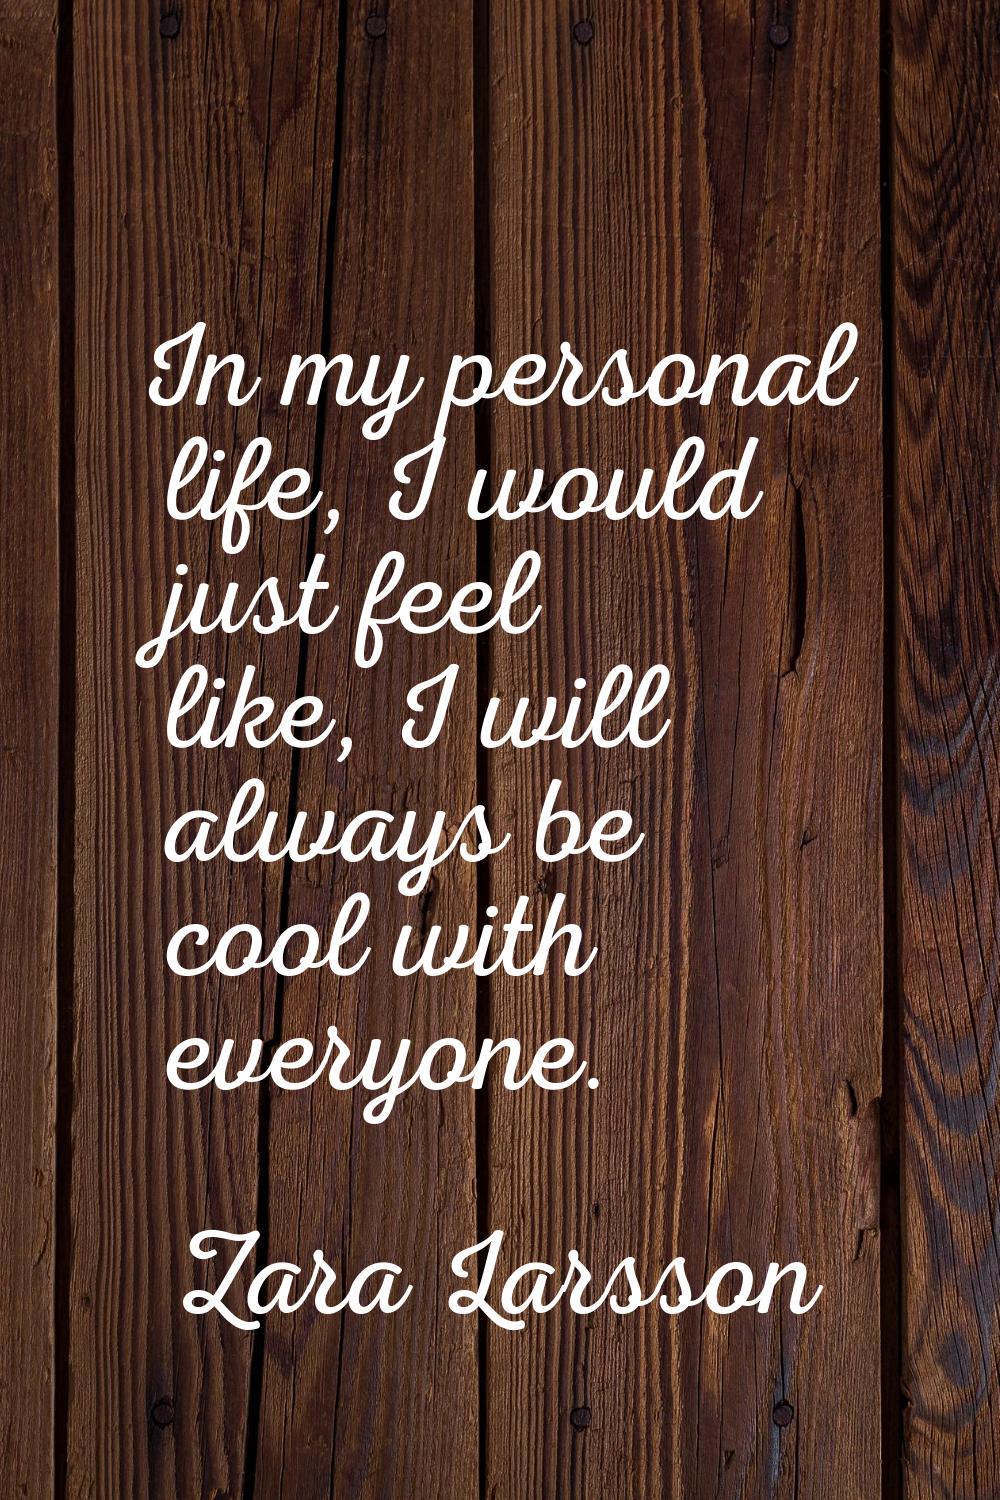 In my personal life, I would just feel like, I will always be cool with everyone.